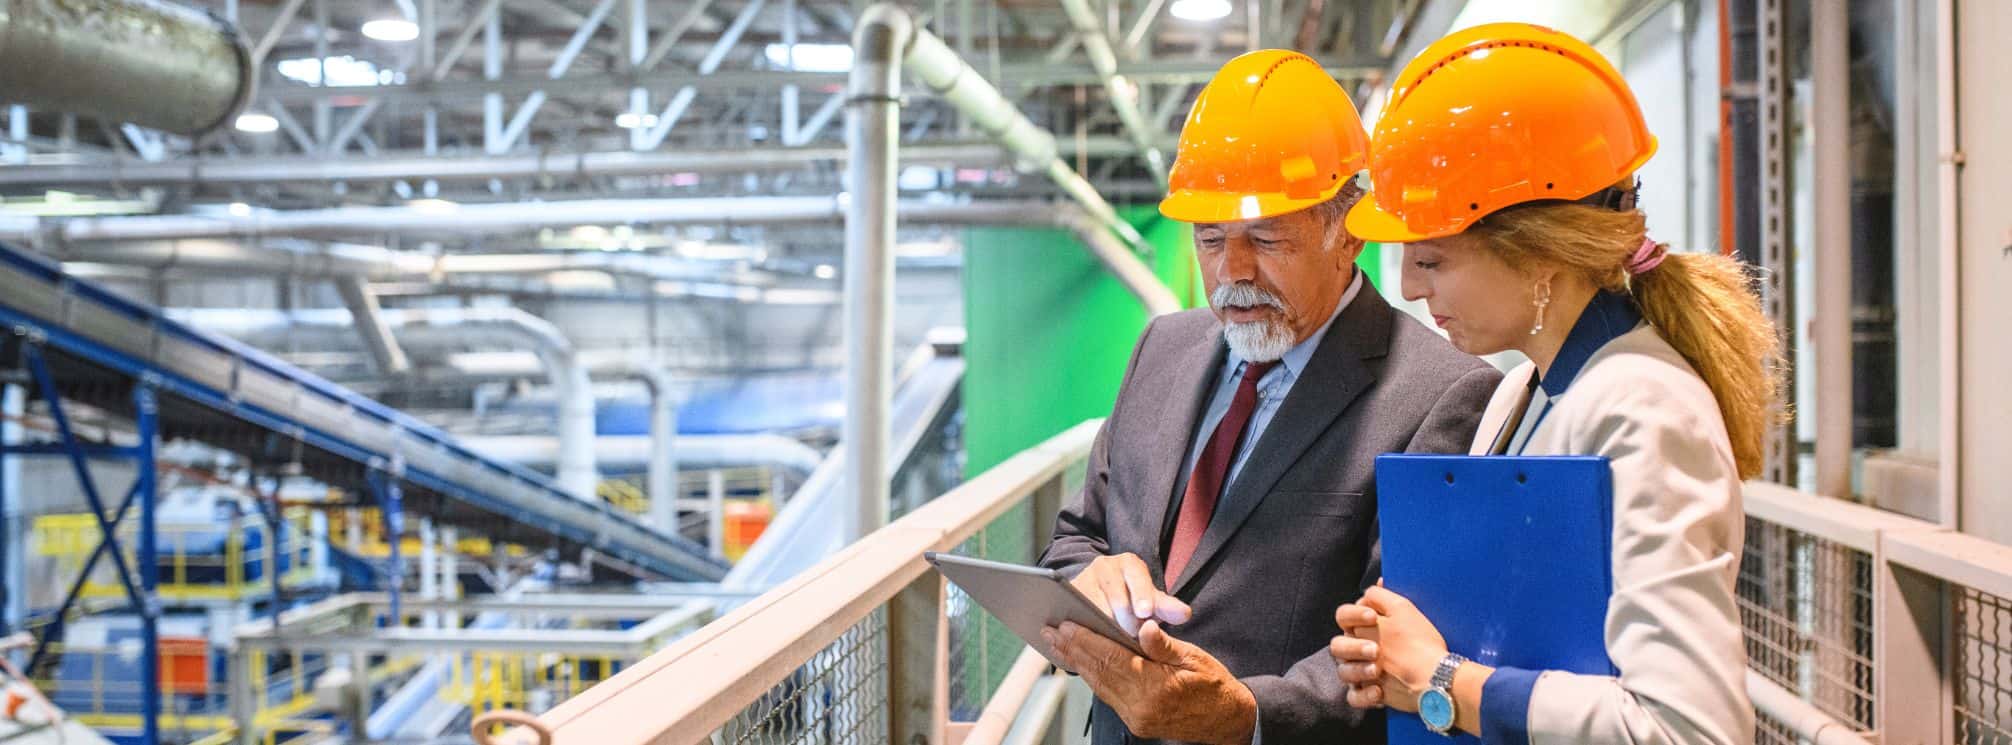 manager communicating with a direct report in a manufacturing facility